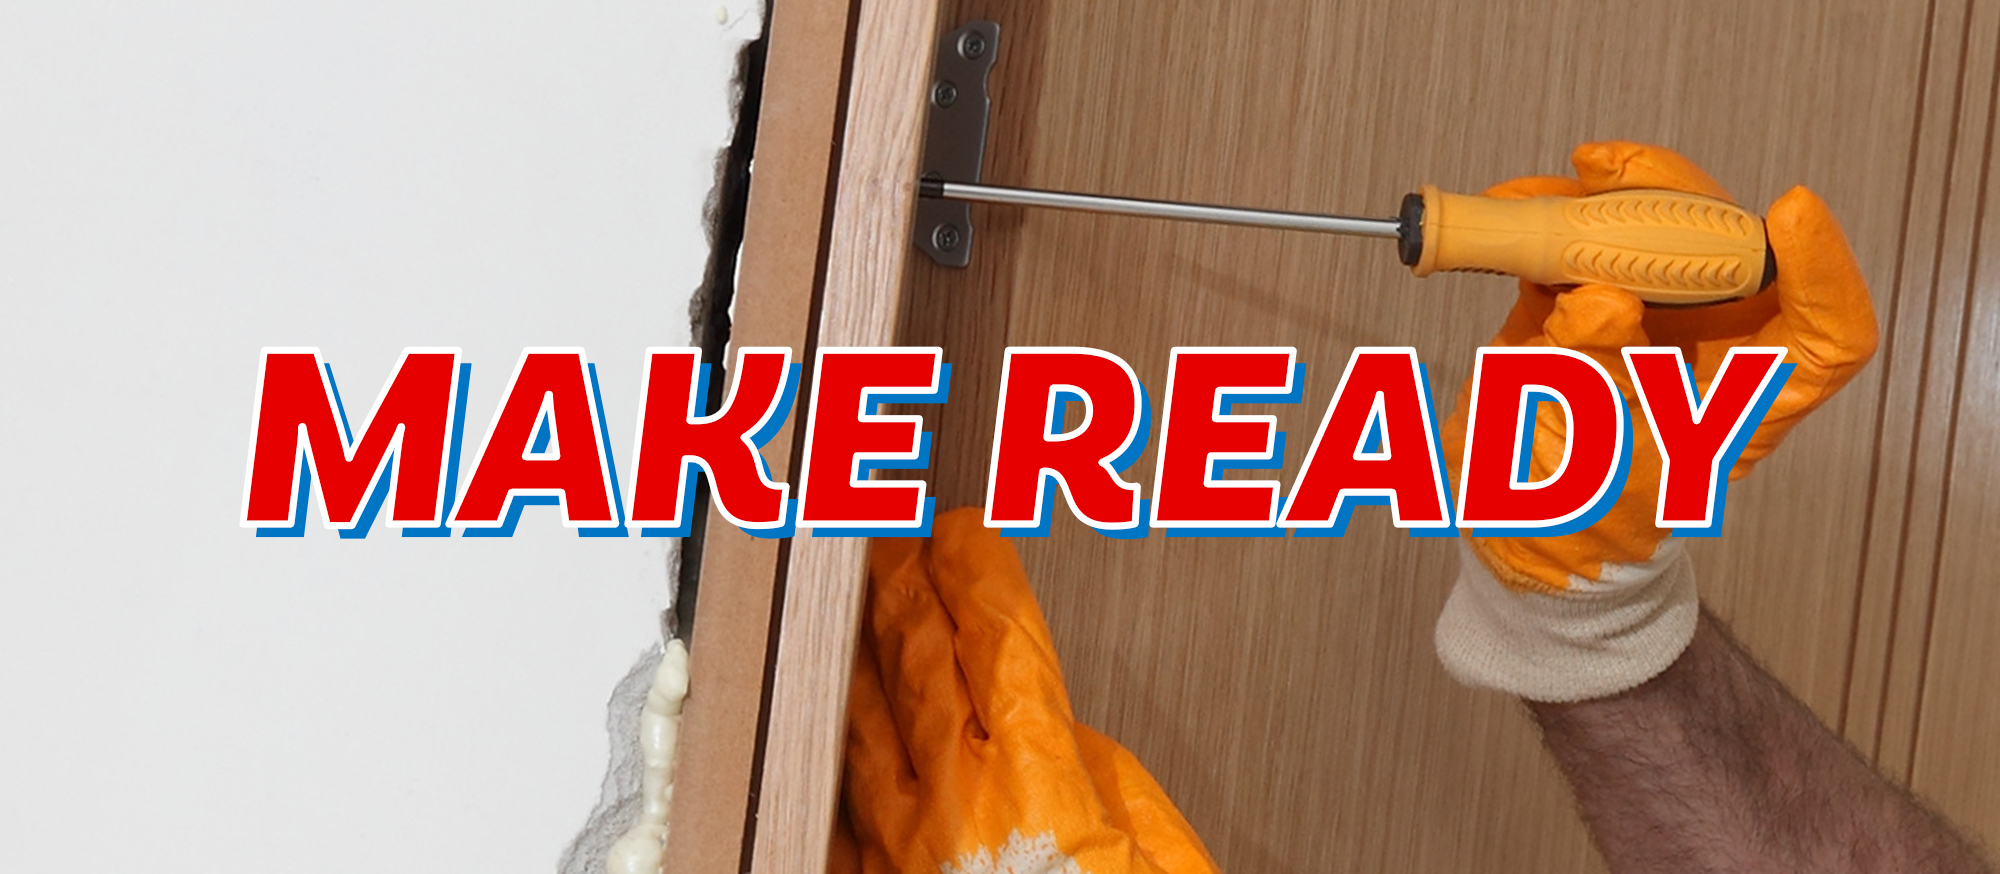 What is a make-ready?